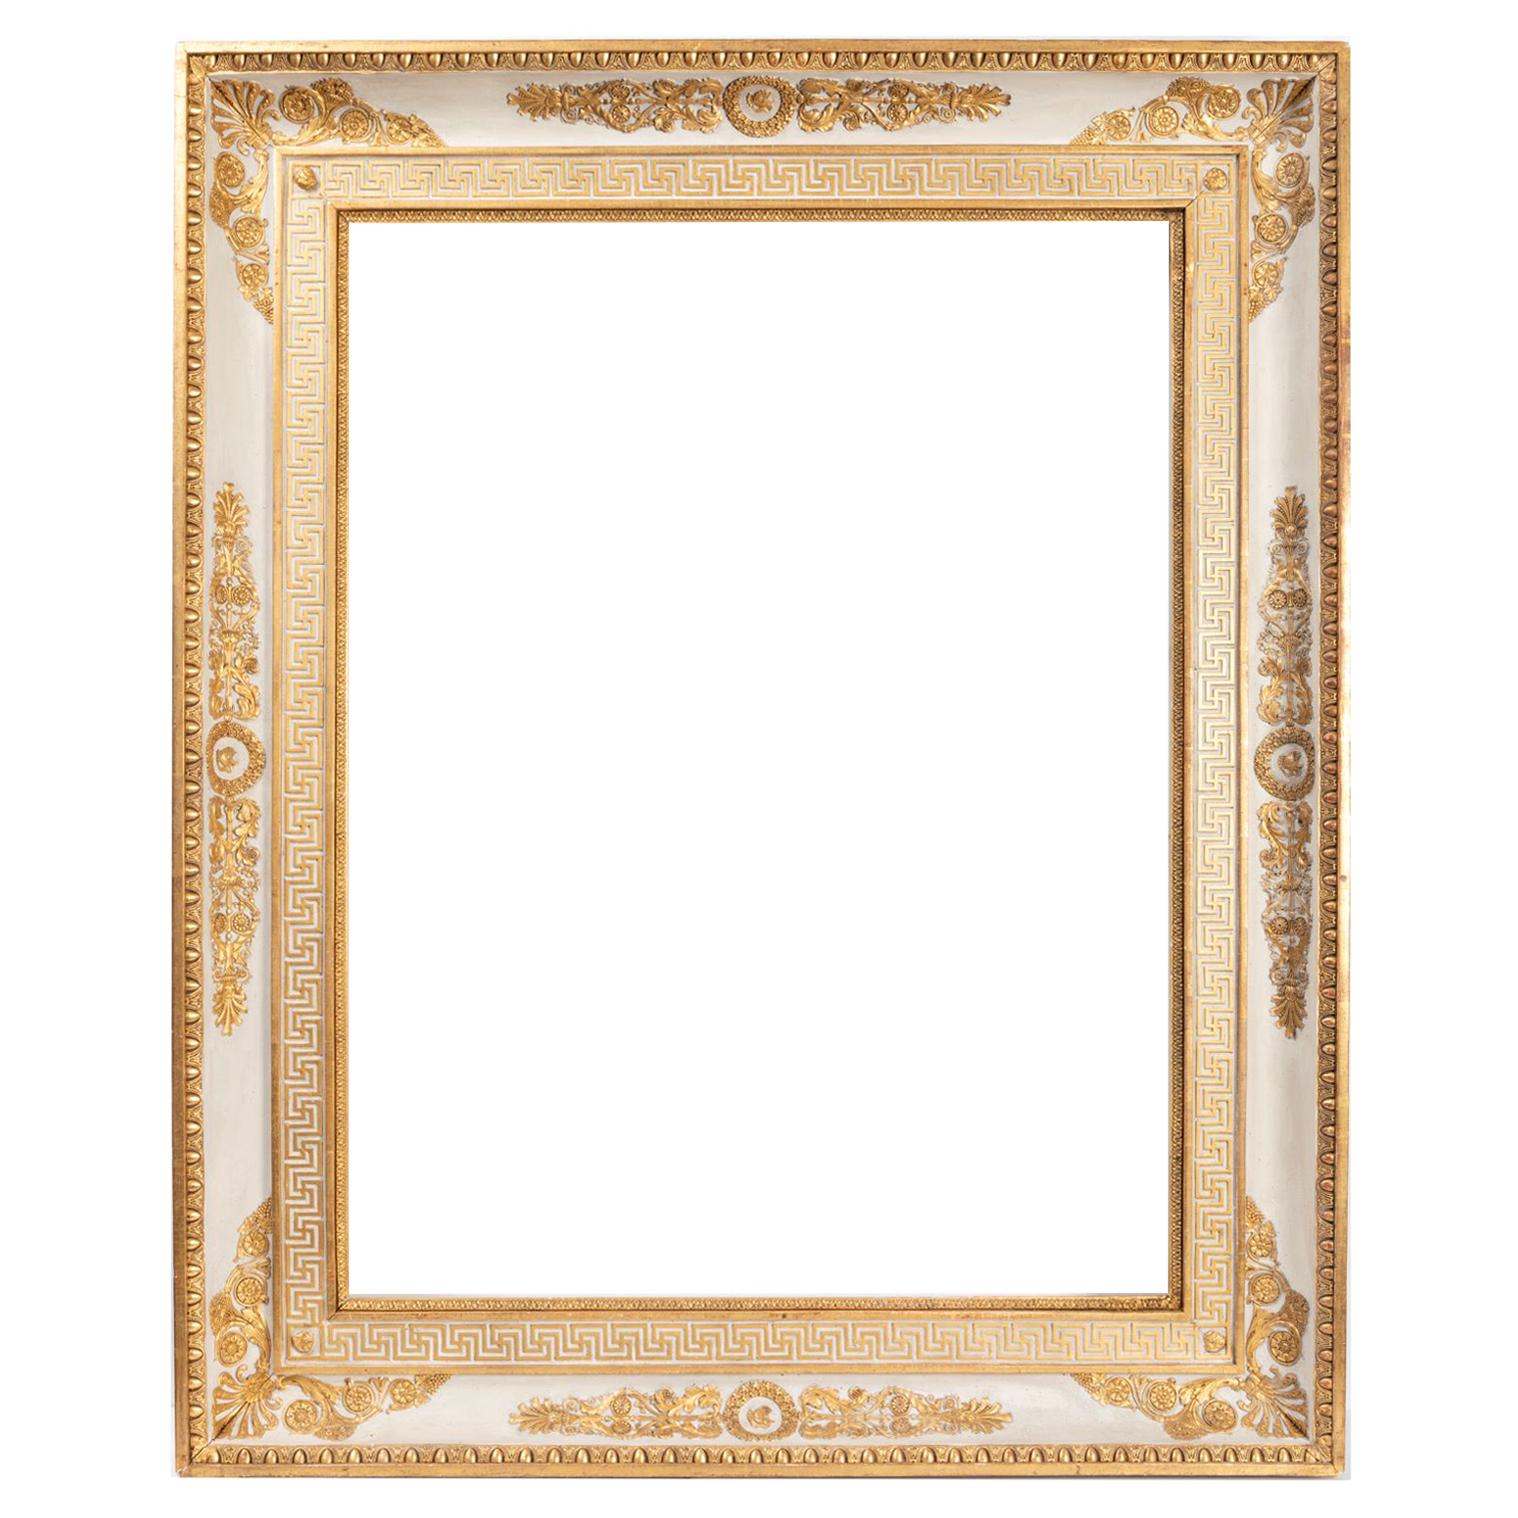 Splendid French Empire Carved Giltwood Frame or Mirror France Early 19th Century For Sale